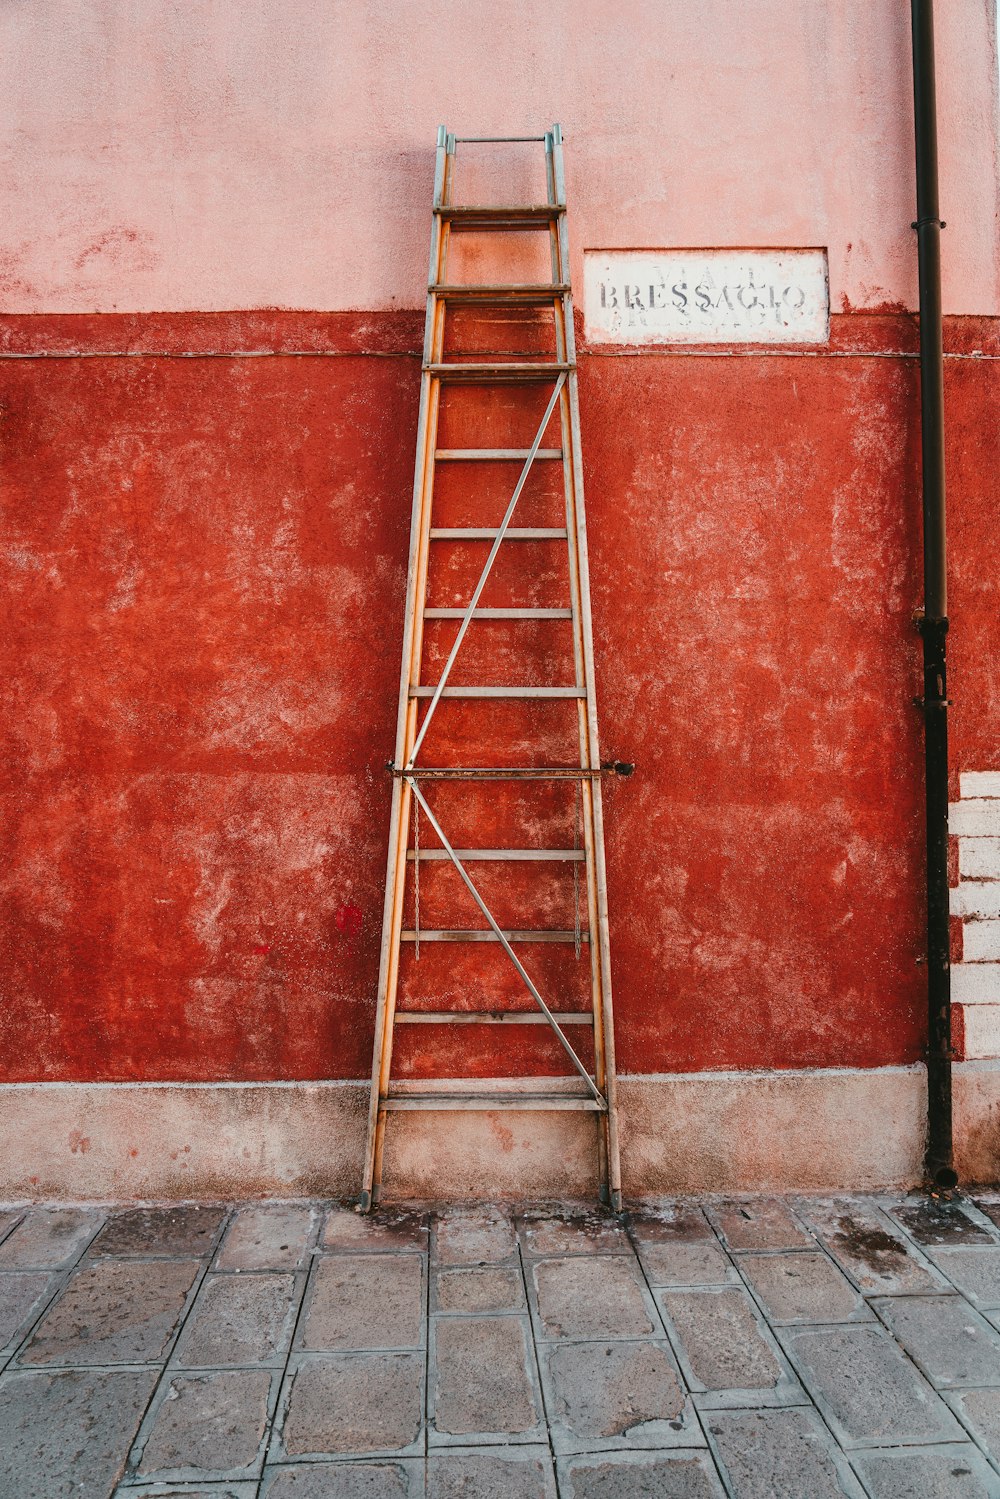 A ladder leaning against a wall